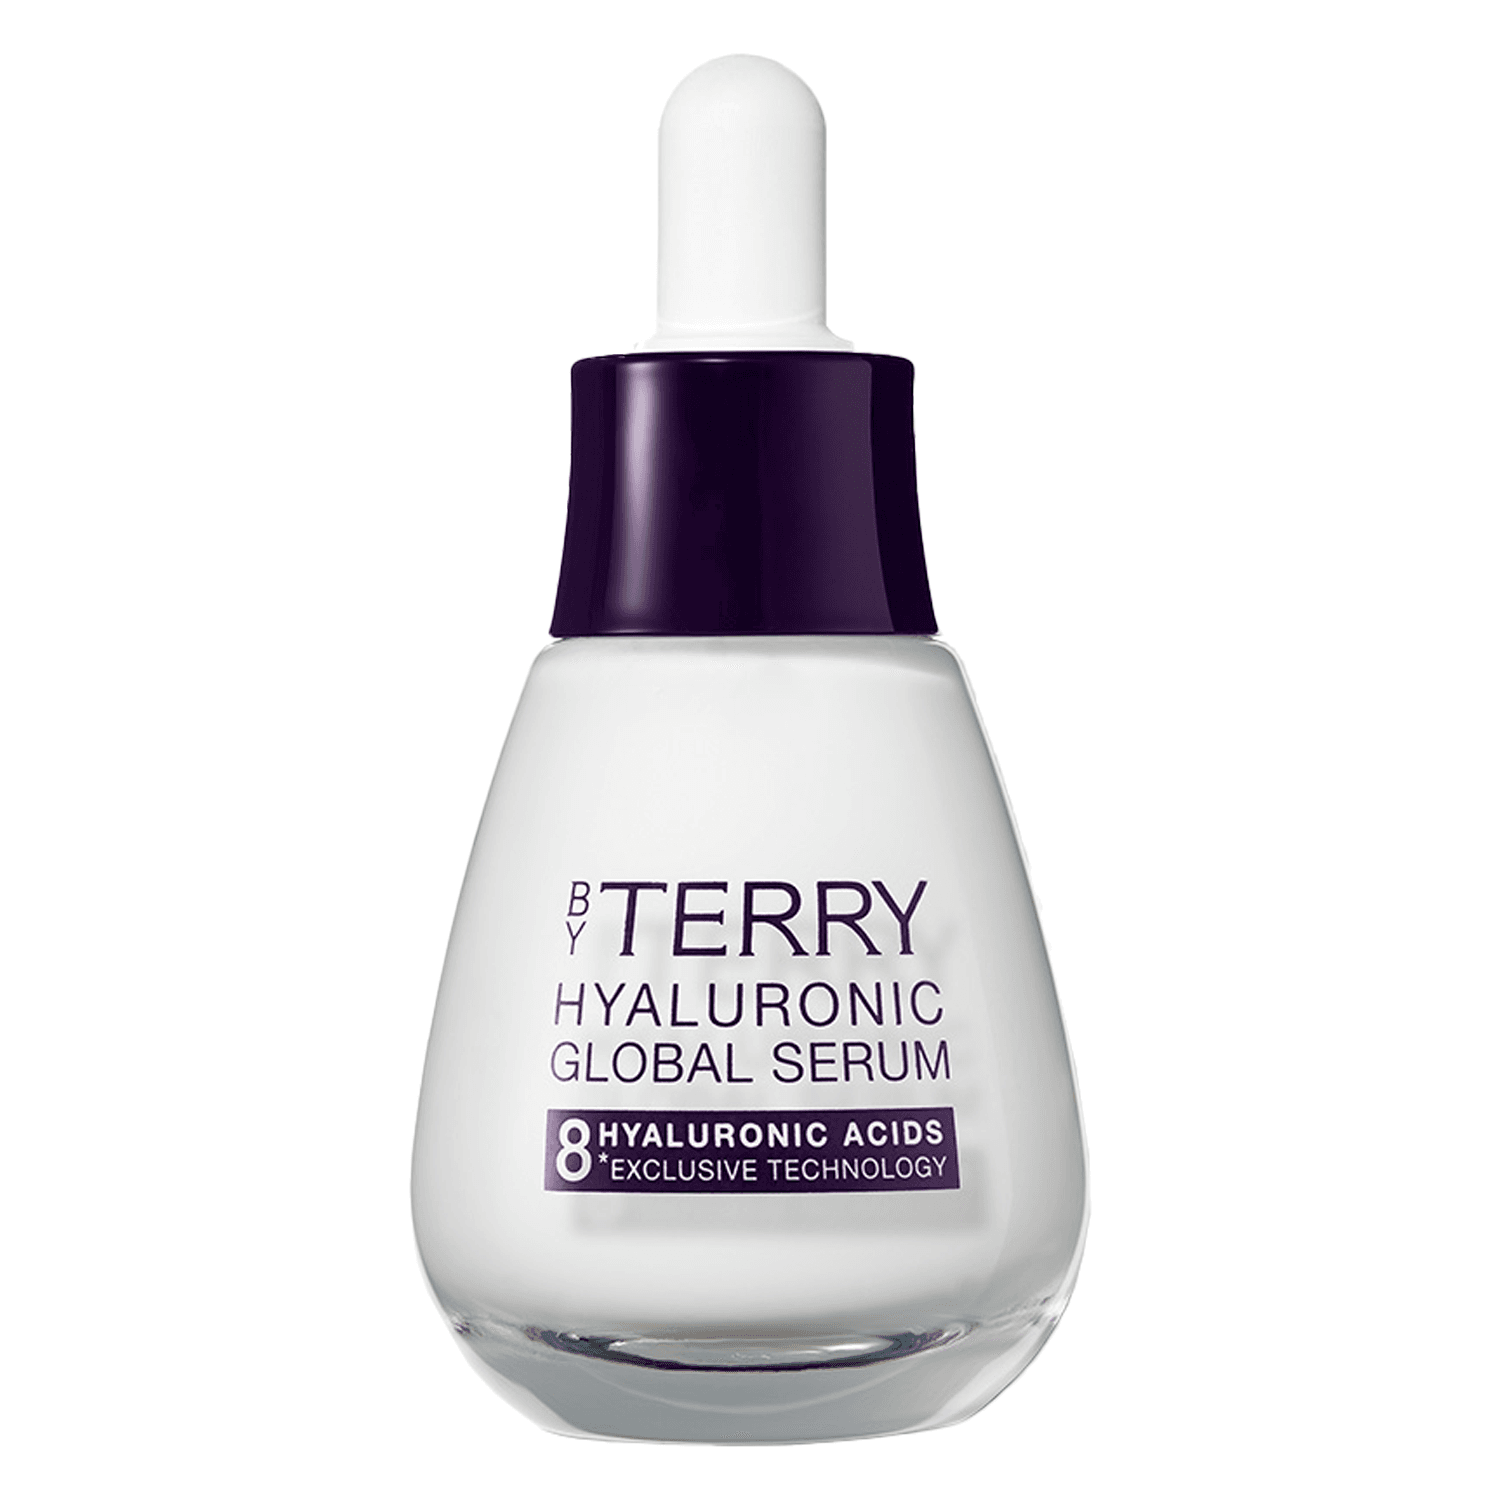 By Terry Care - Hyaluronic Global Serum